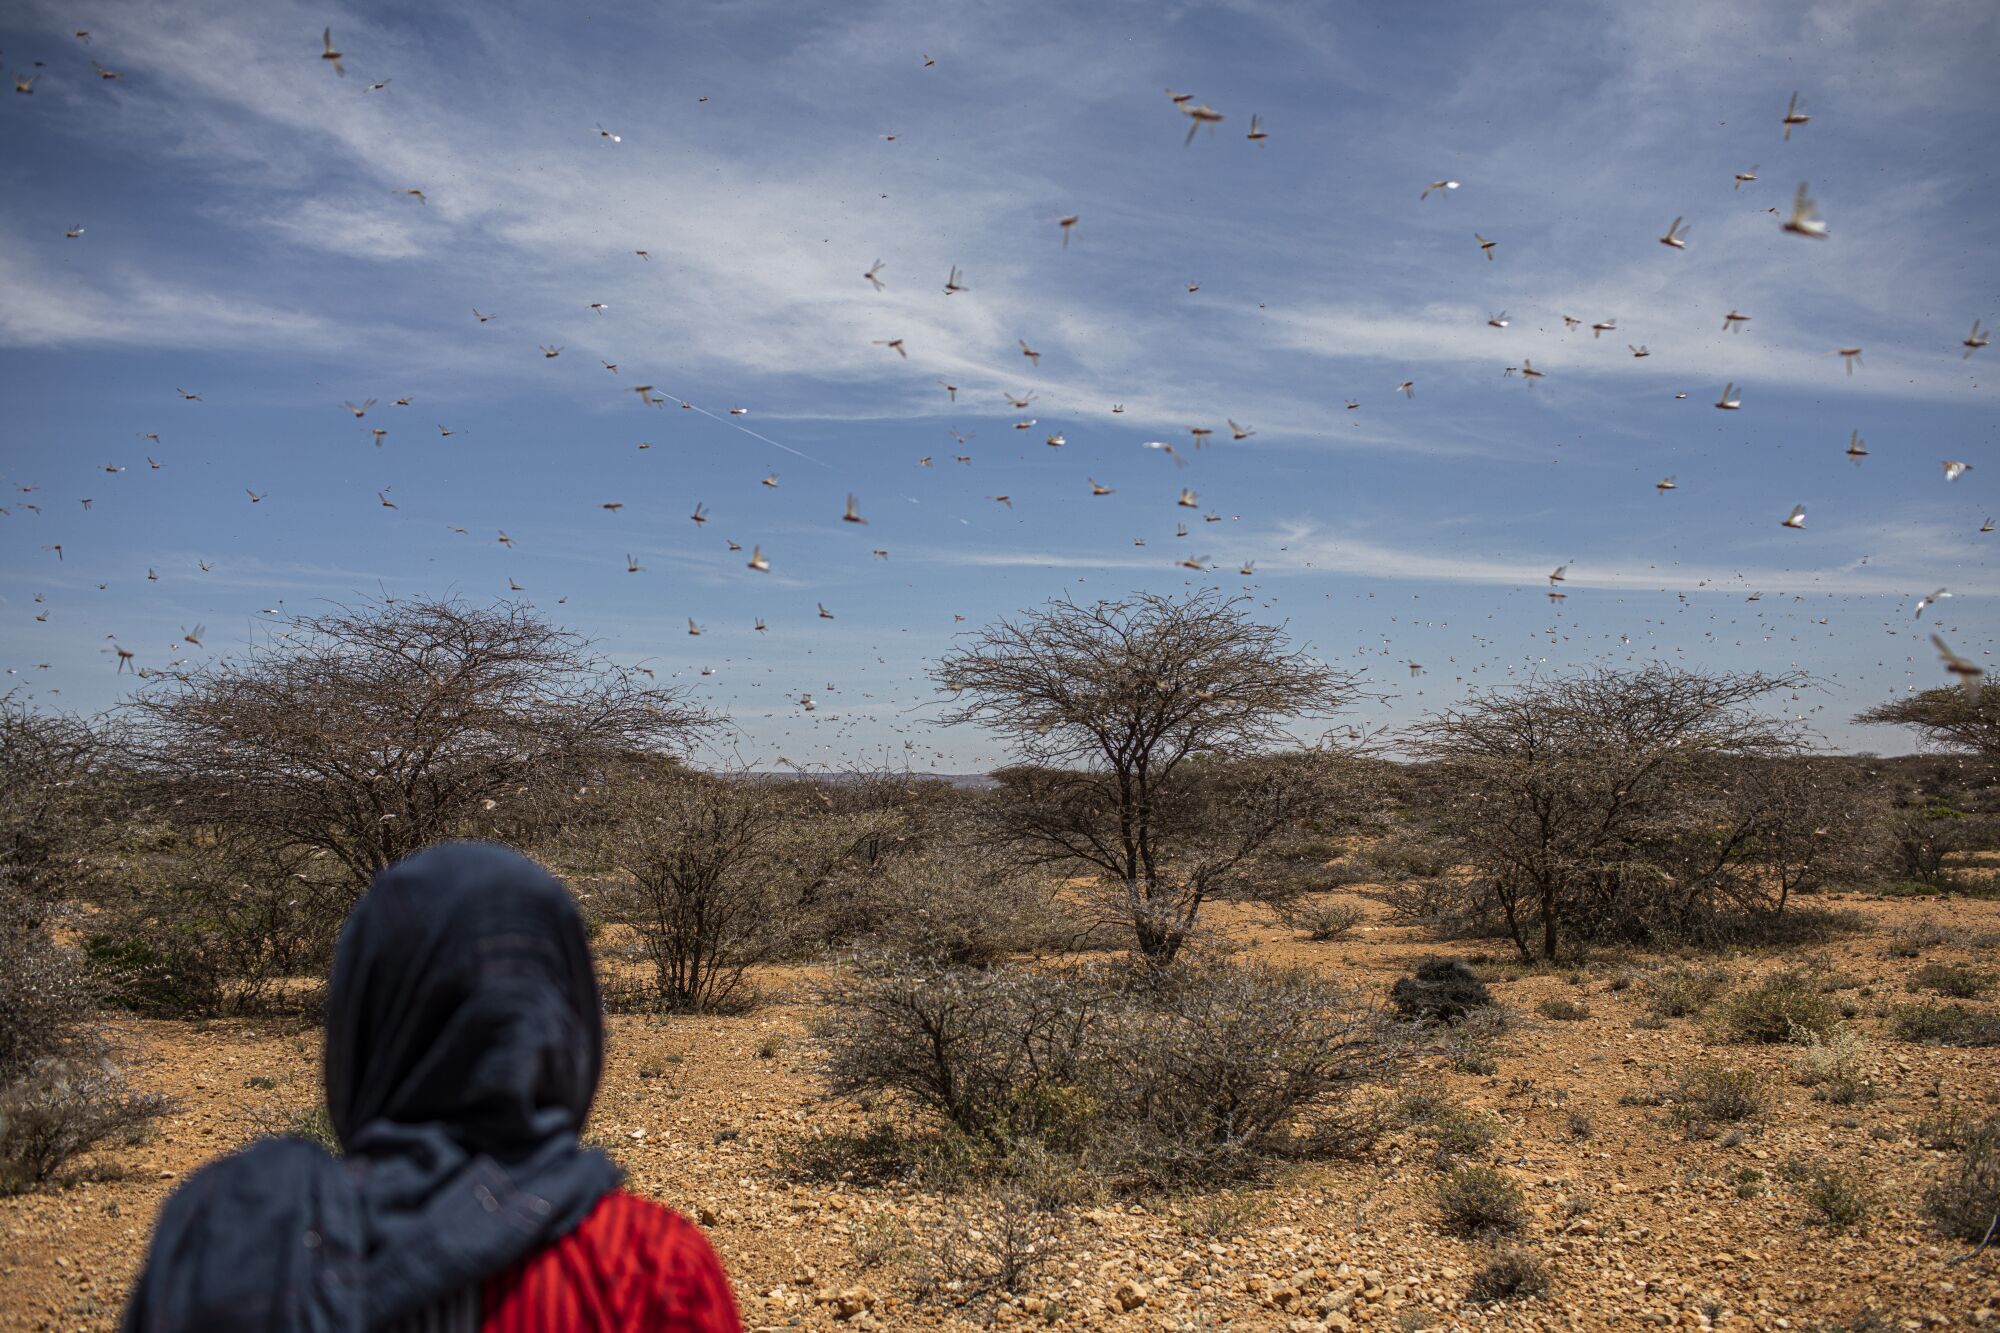 A swarm of desert locusts flies over over land used for grazing animals in a remote part of Somalia.